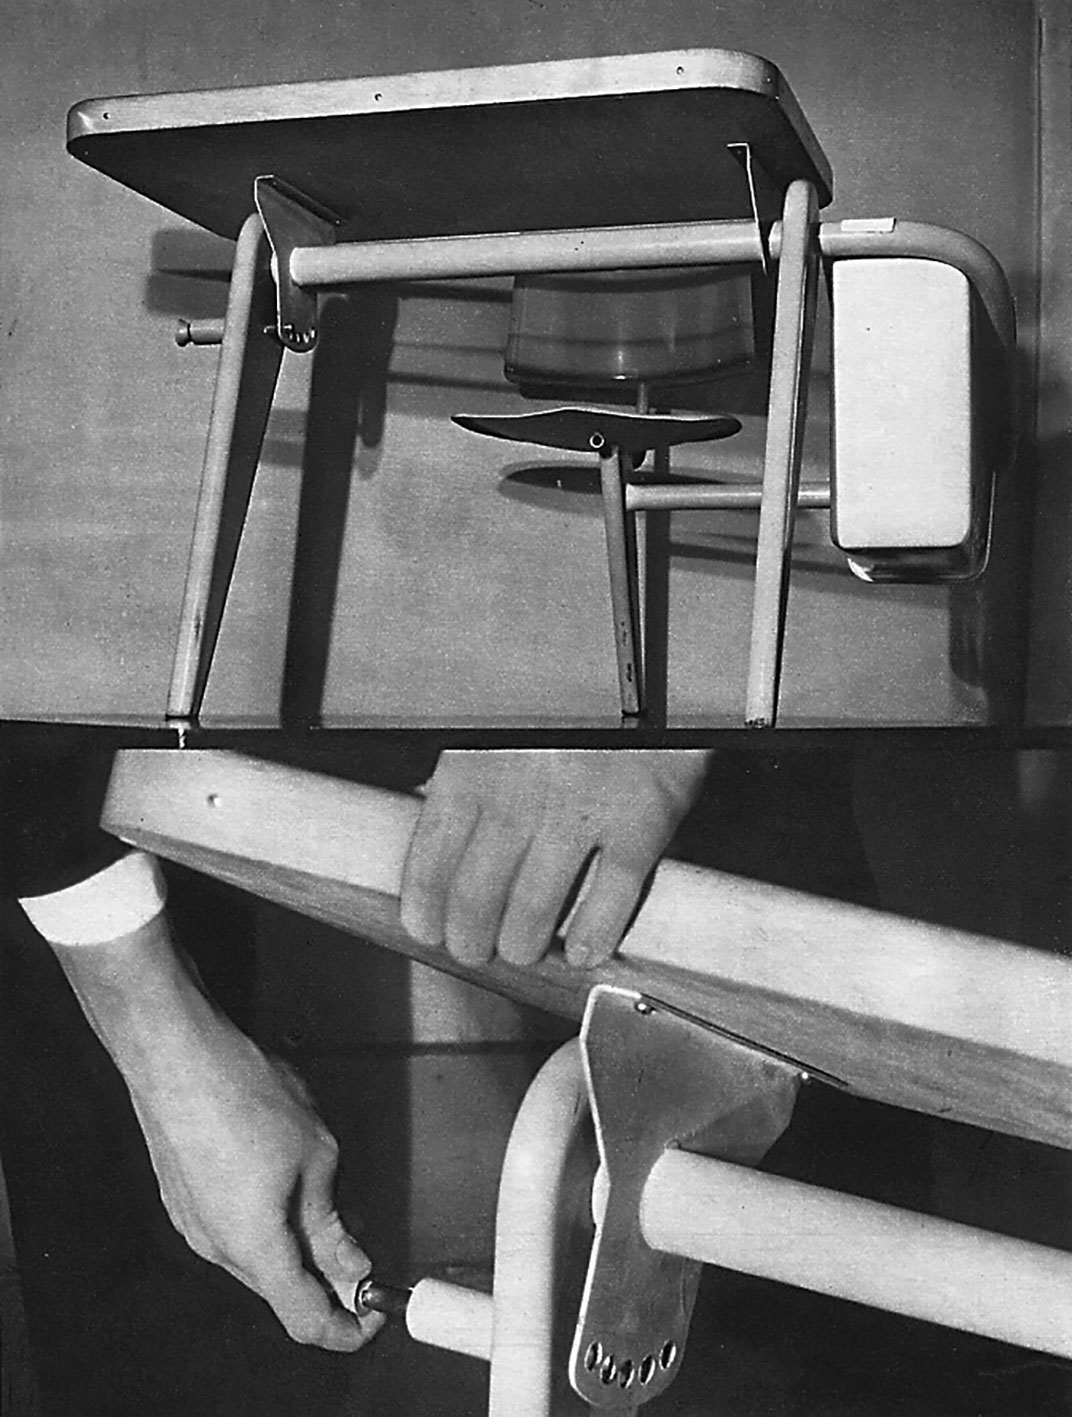 Prototype of single-seater school desk developed in collaboration with Jacques André, 1936. Detail of the adjustment system of the desk-top.